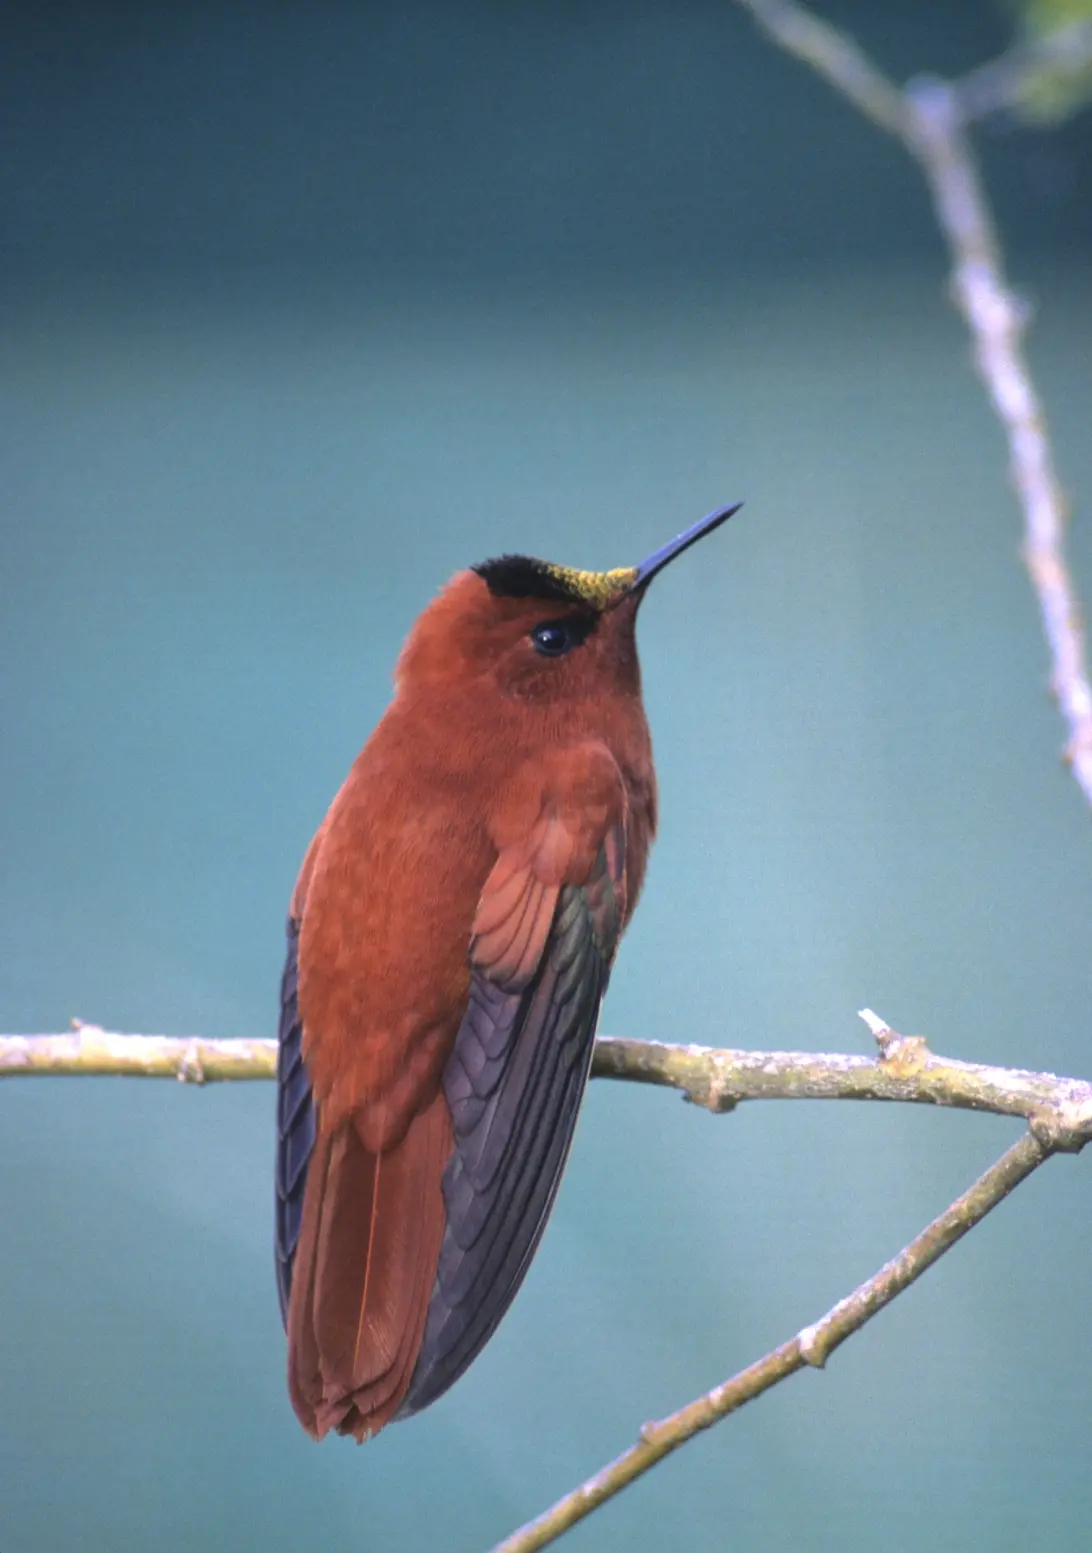 The Juan Fernandez Firecrown, threatened by a range of introduced plant and animal species on Isla Robinson Crusoe, Juan Fernandez Islands, Chile